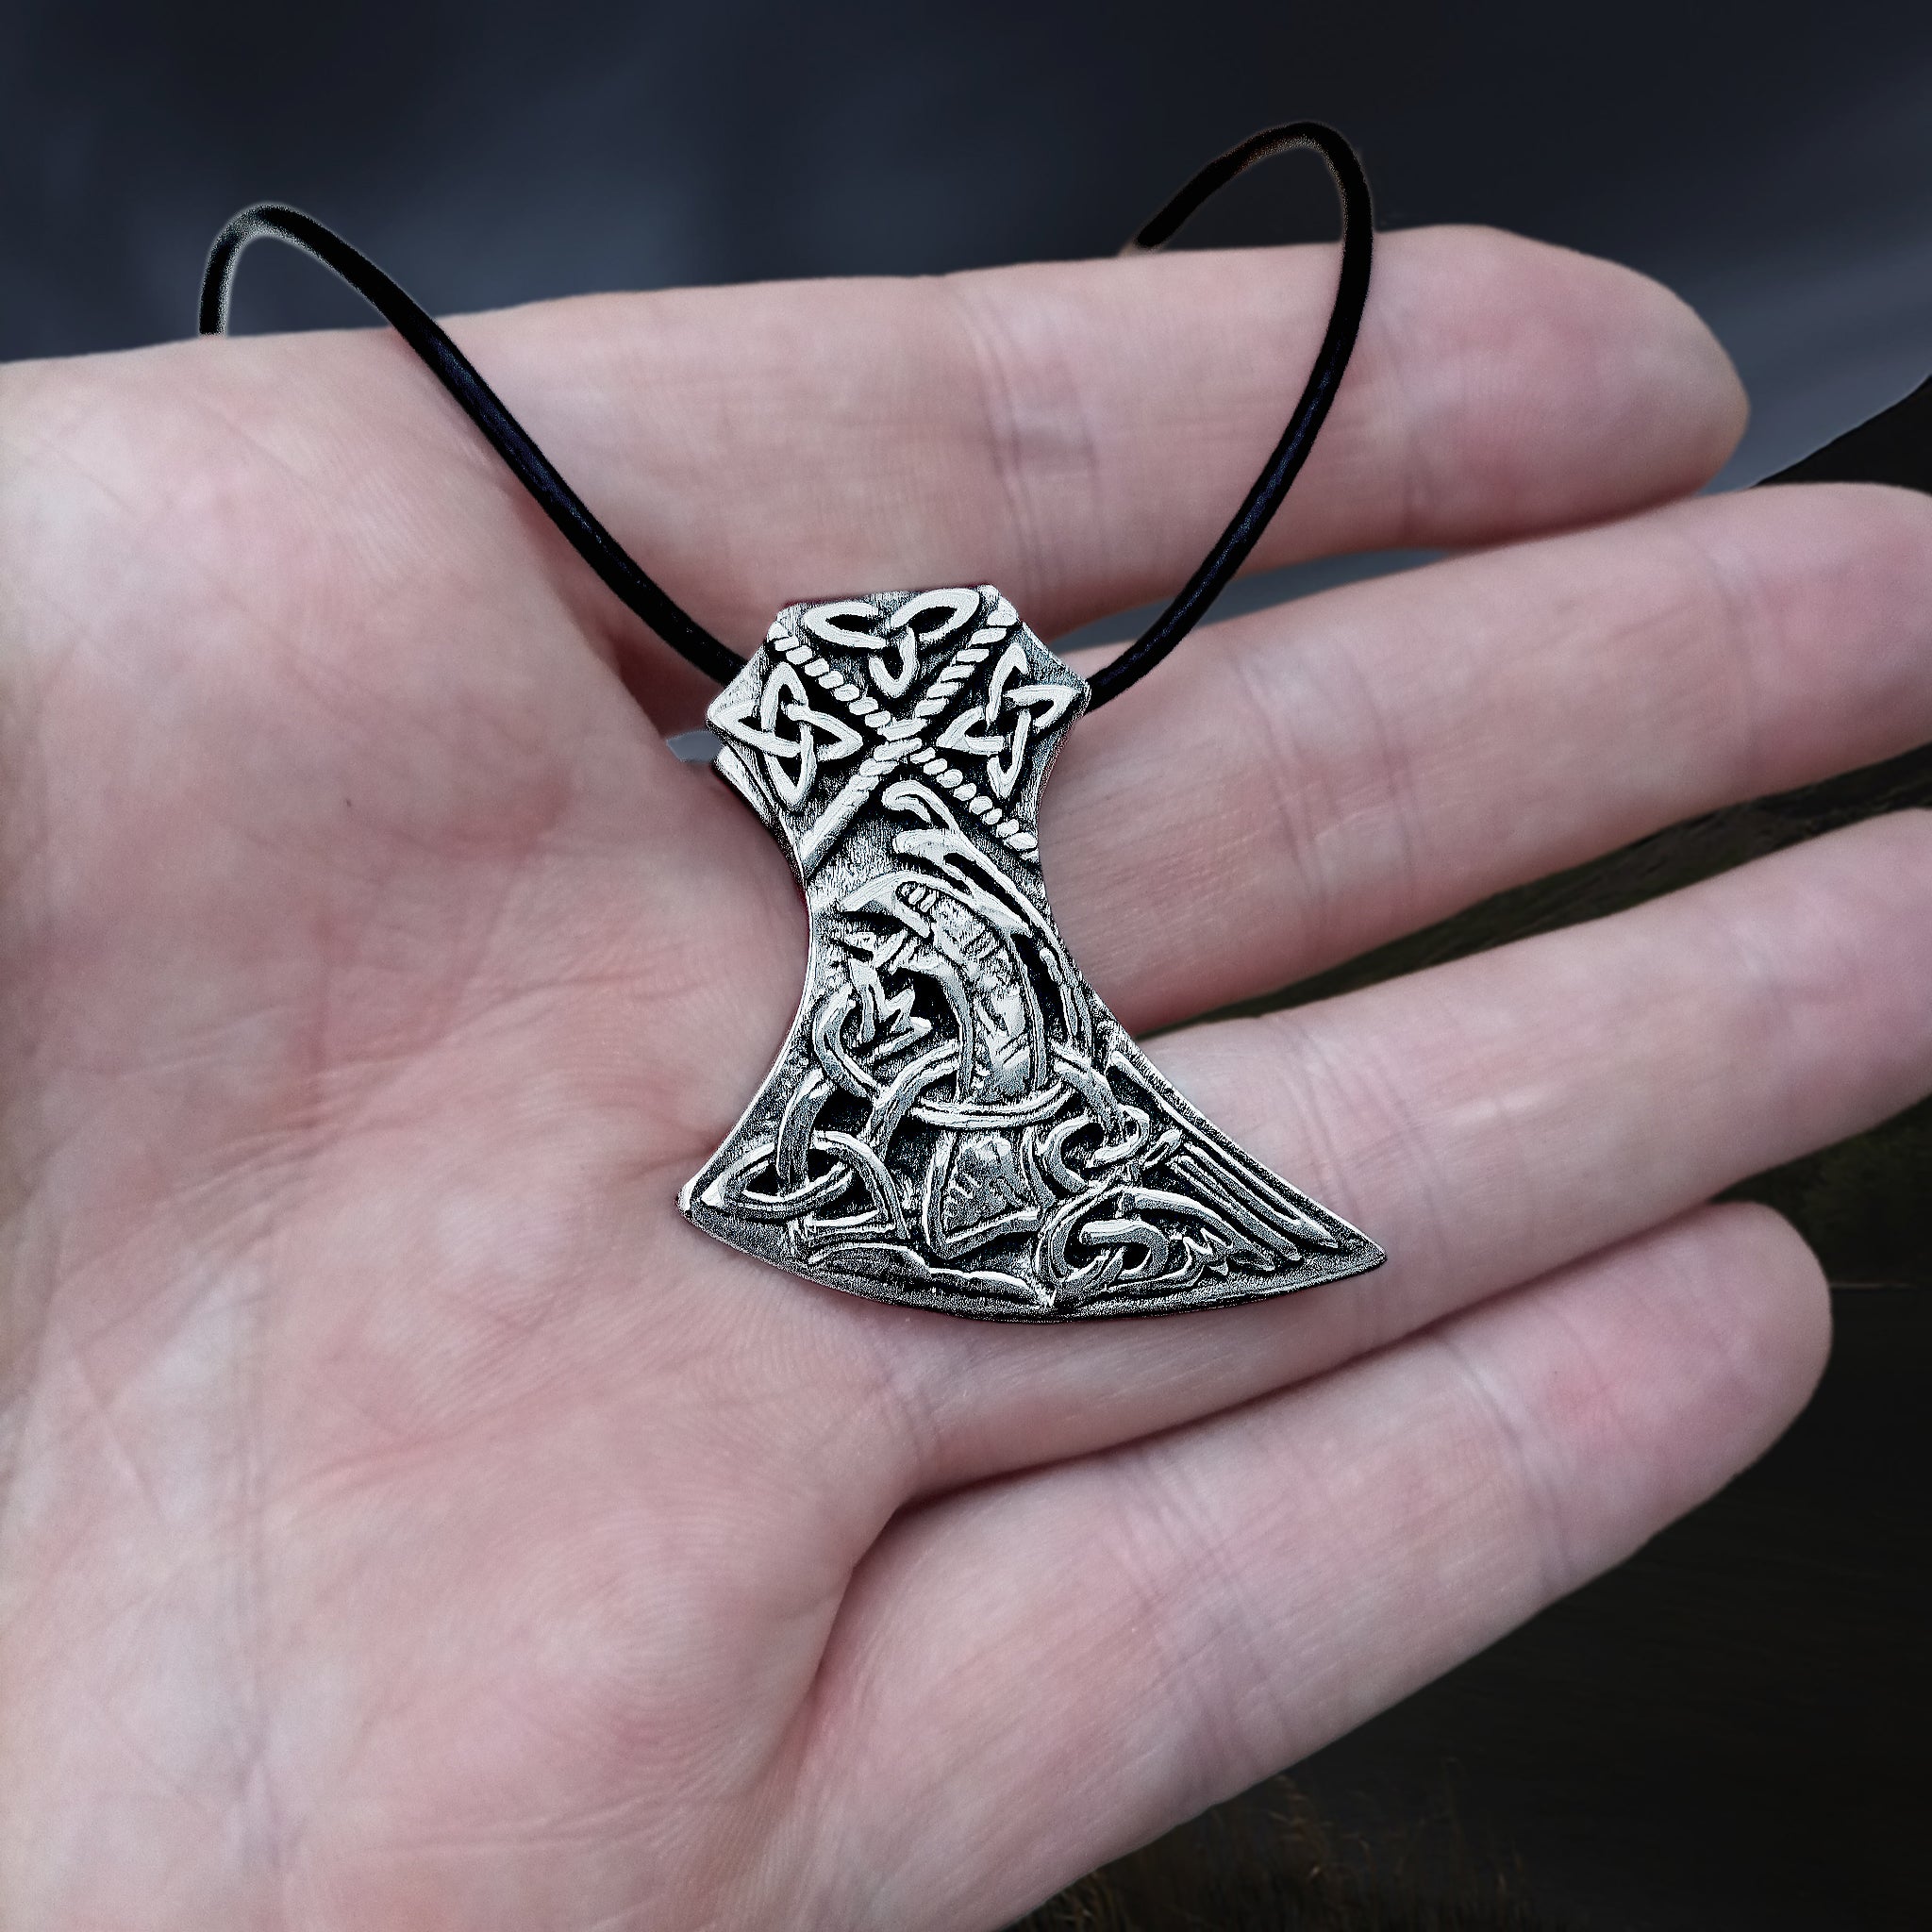 Silver Knotwork Viking Axe Head Pendant on Hand with Leather Thong